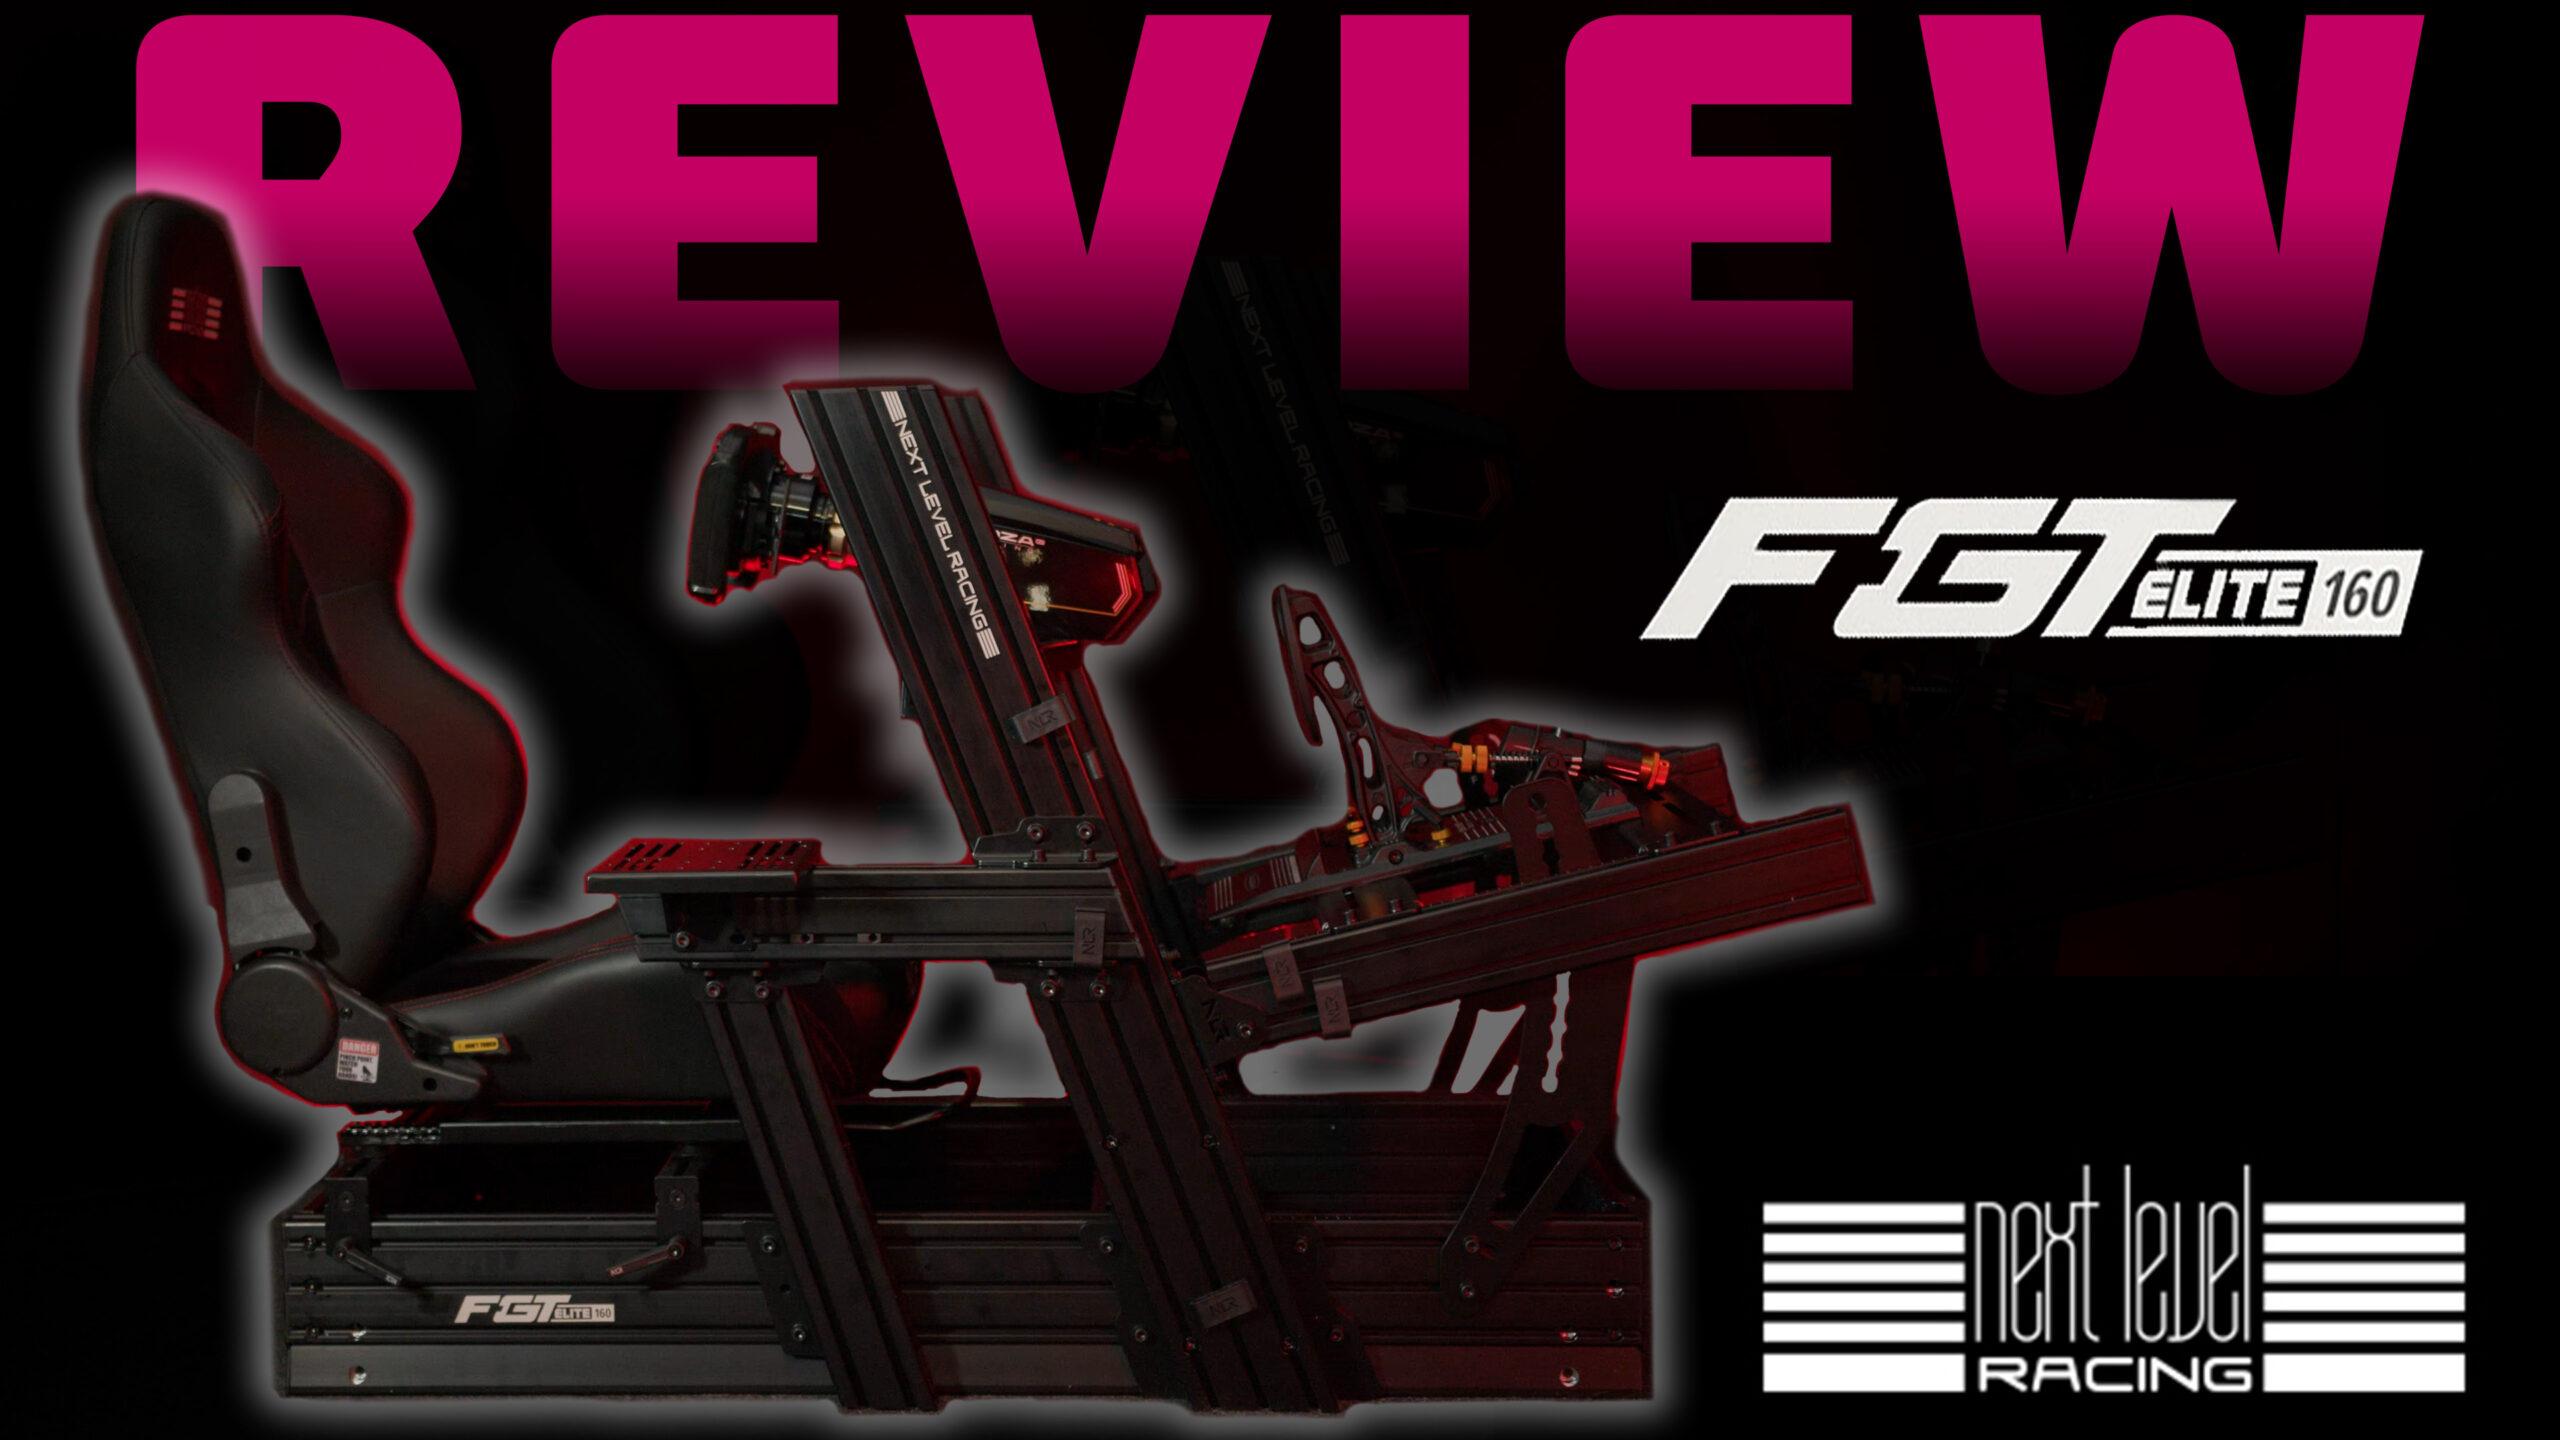 Next Level Racing F-GT Elite 160 review: a new segment leader